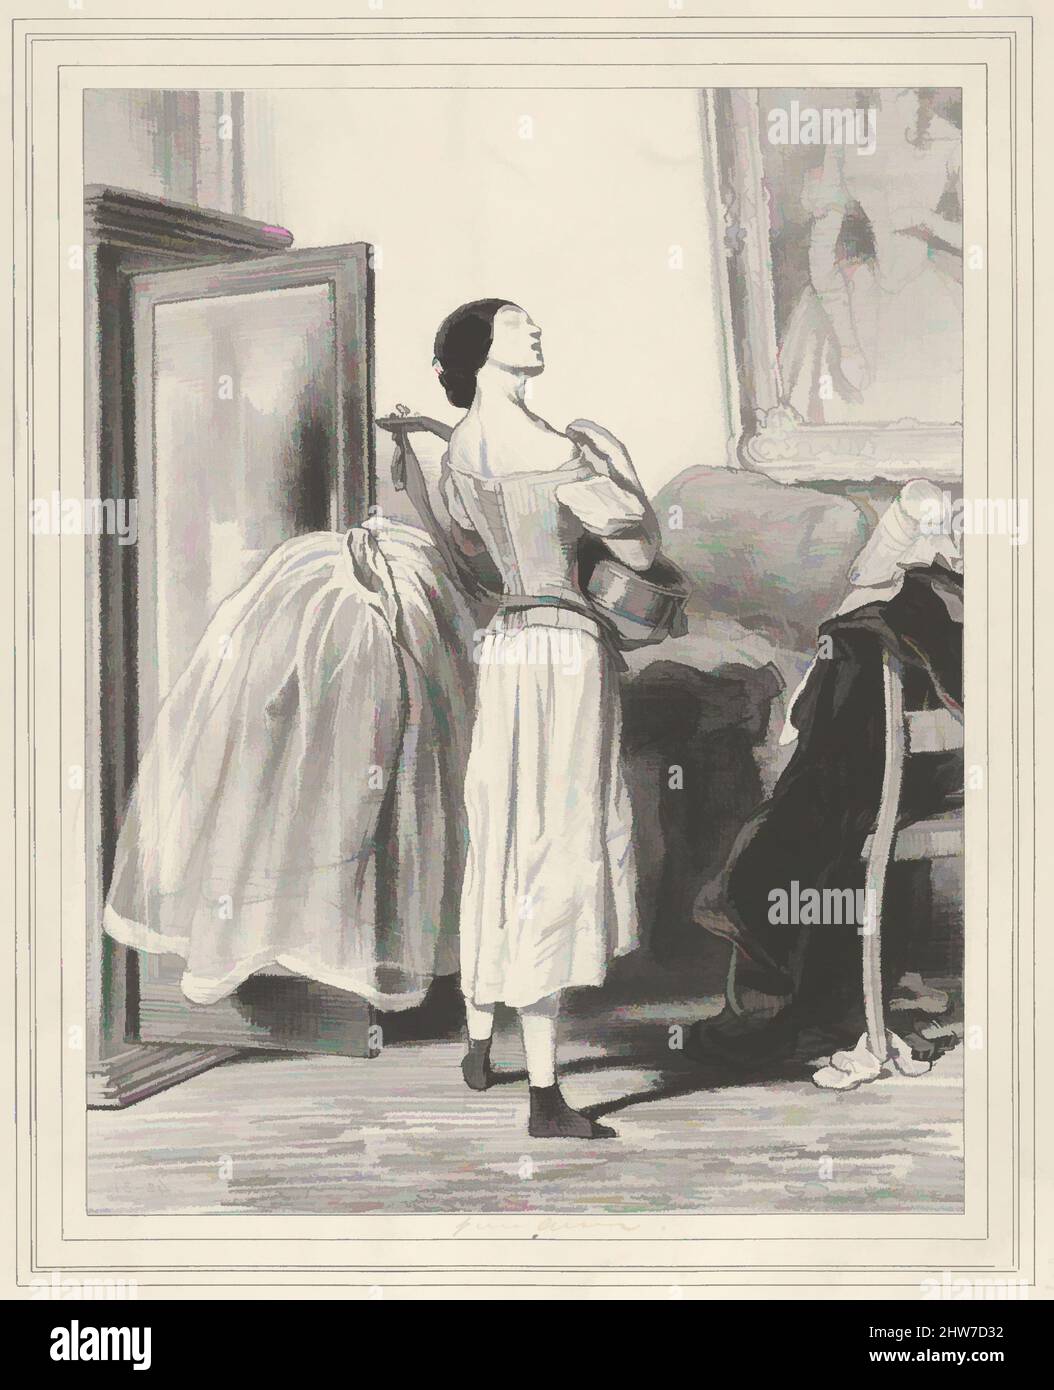 Art inspired by Rien n'est si joli que la fable, si triste que la vérité!, plate 30 from the suite Les Lorettes, published in Le Charivari, October 21, 1842, October 21, 1842, Lithograph; first state of three, sheet: 14 3/16 x 10 1/16 in. (36 x 25.5 cm), Prints, Paul Gavarni Chevalier, Classic works modernized by Artotop with a splash of modernity. Shapes, color and value, eye-catching visual impact on art. Emotions through freedom of artworks in a contemporary way. A timeless message pursuing a wildly creative new direction. Artists turning to the digital medium and creating the Artotop NFT Stock Photo